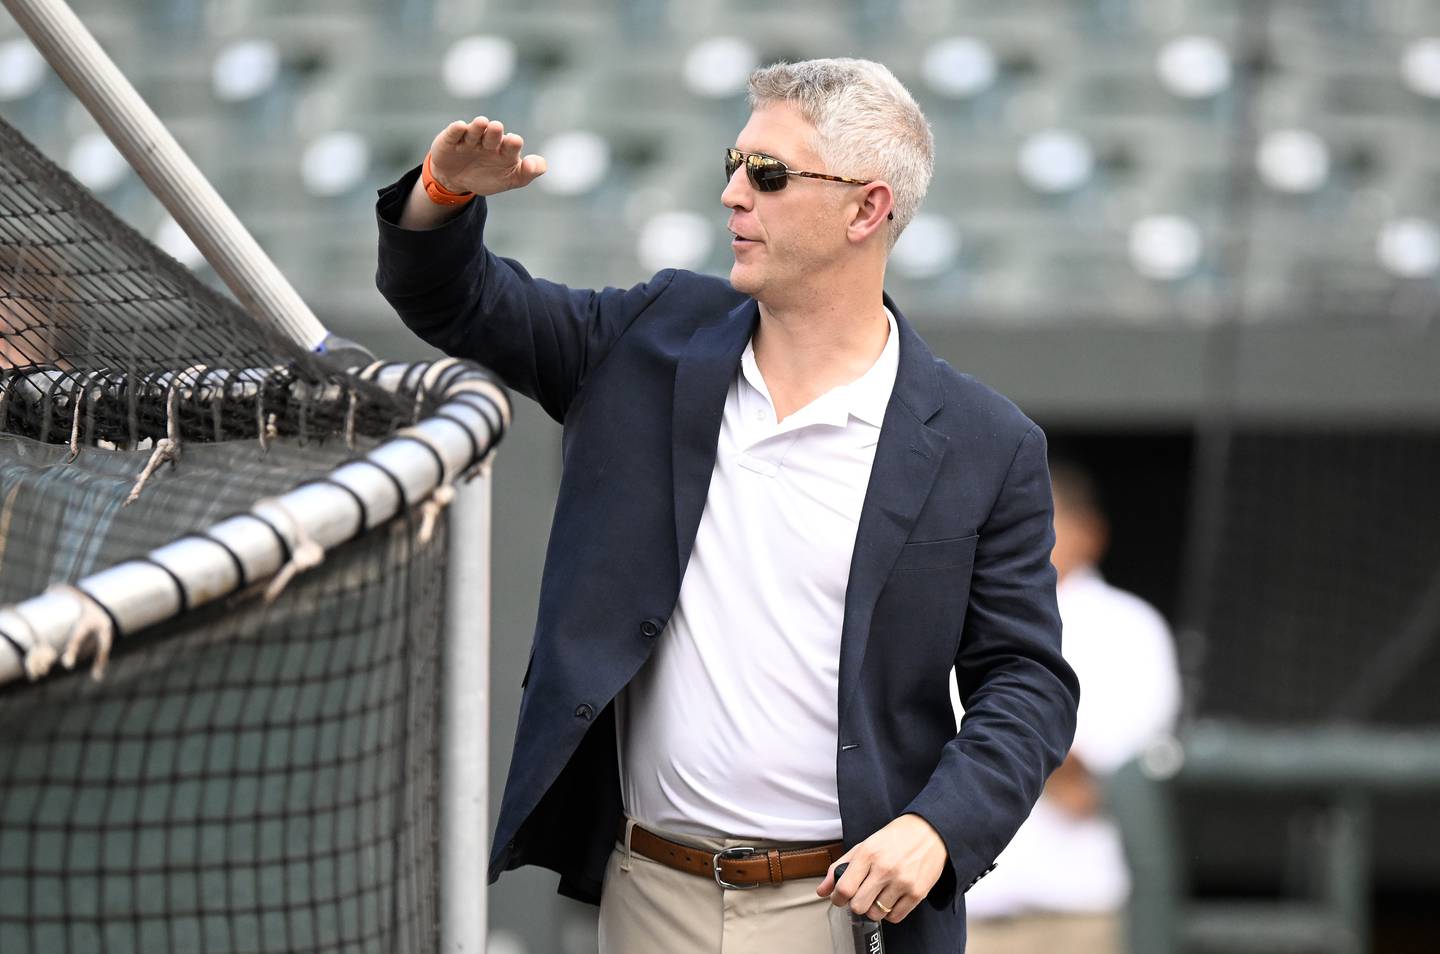 BALTIMORE, MARYLAND - SEPTEMBER 21: General Manager Mike Elias of the Baltimore Orioles watches batting practice before the game against the Detroit Tigers at Oriole Park at Camden Yards on September 21, 2022 in Baltimore, Maryland.